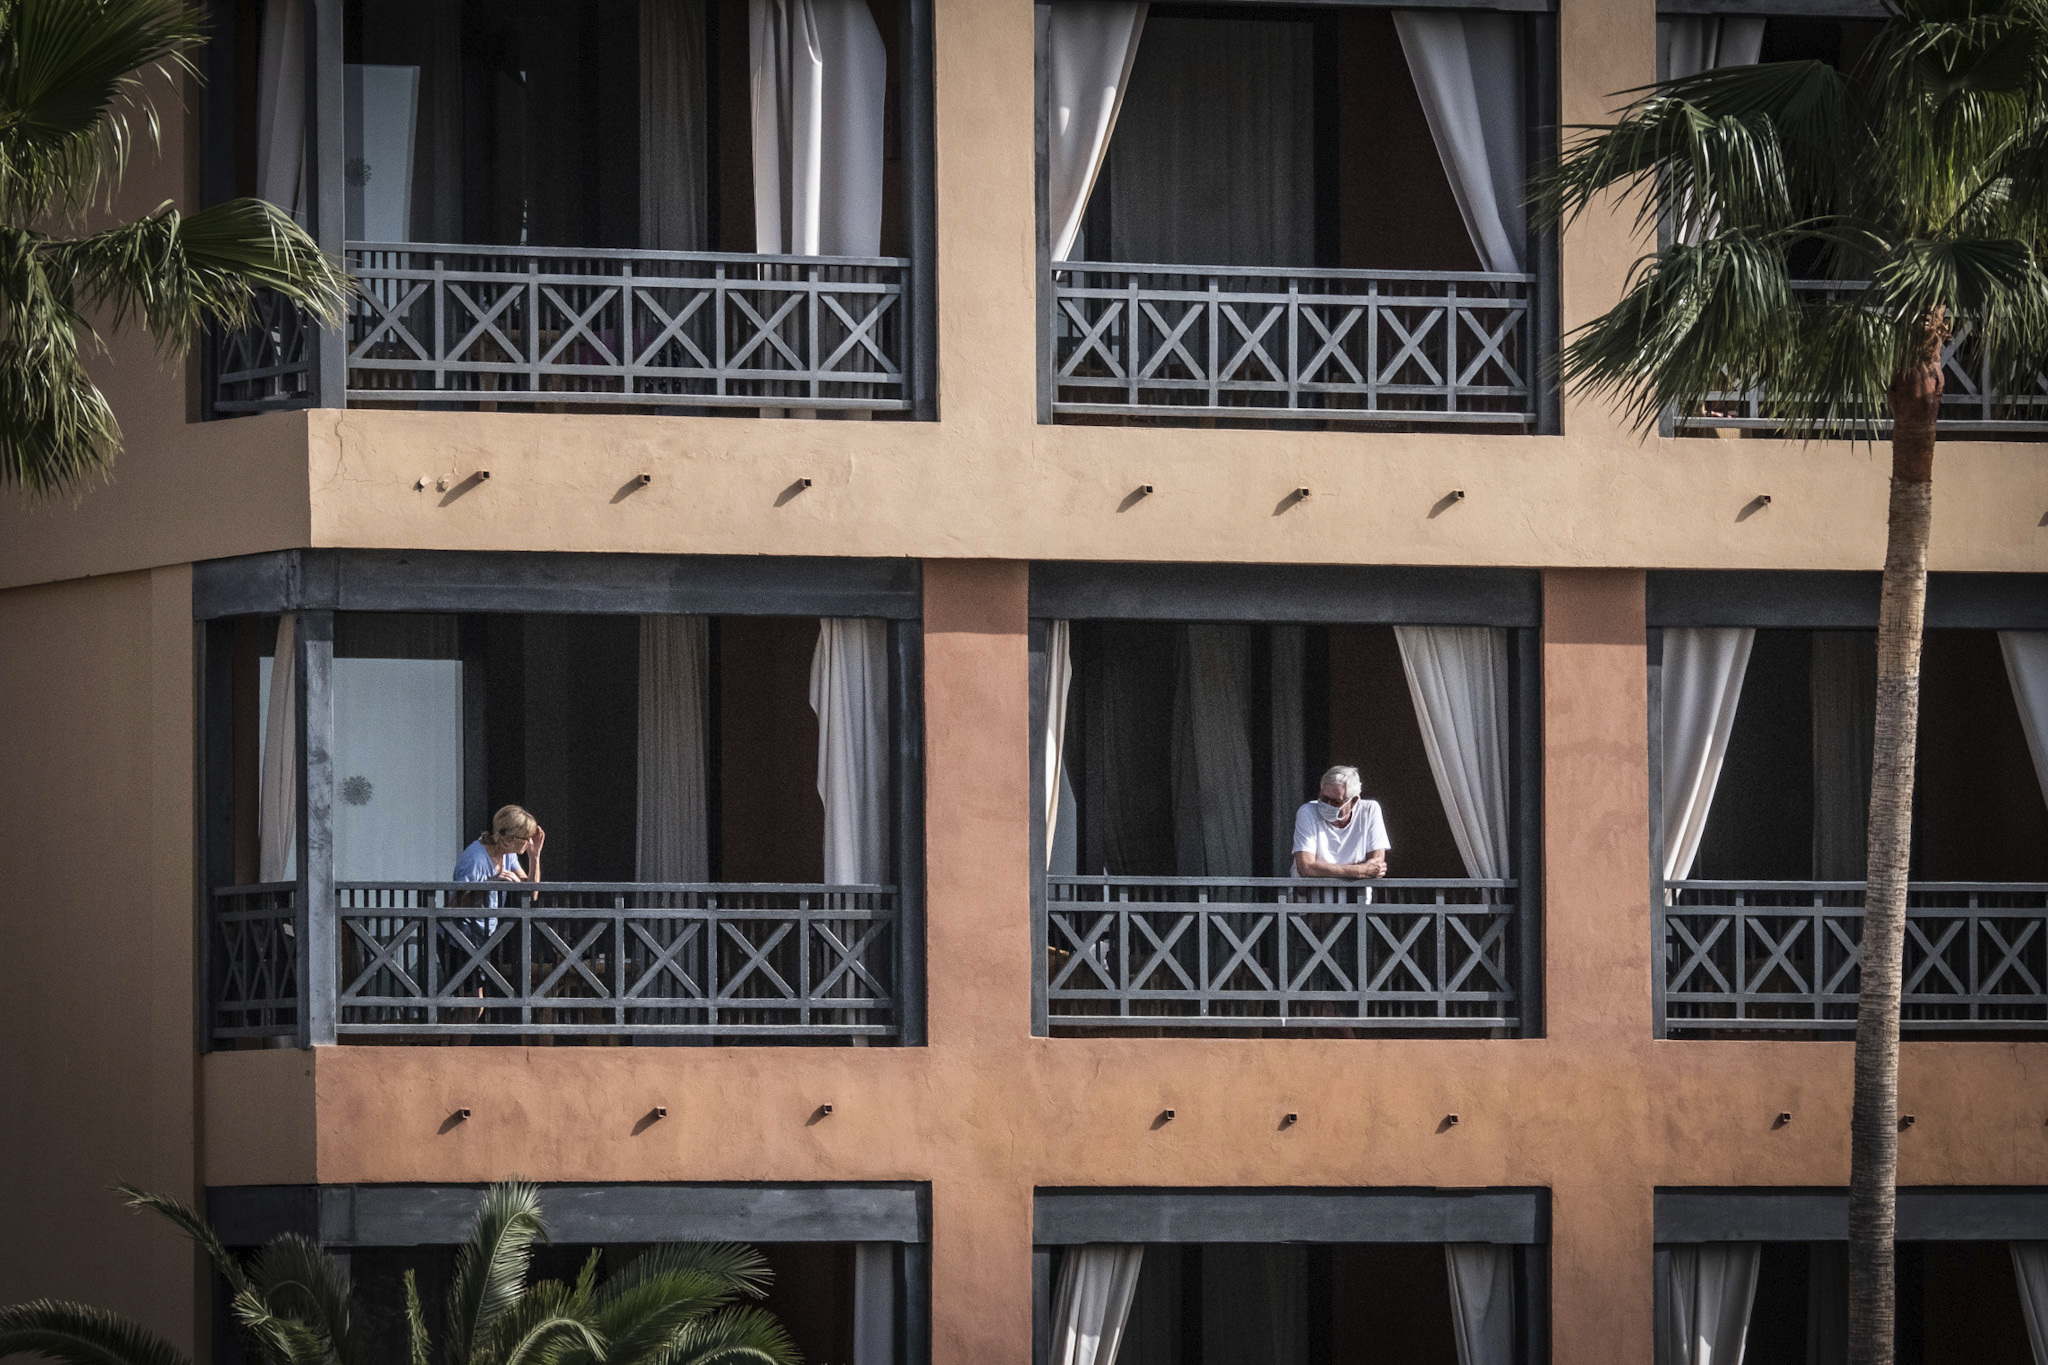 The hotel H10 Costa Adeje Palace, which has been quarantined because of coronavirus cases, continues to be cordoned off by the police on Feb. 27 in Santa Cruz de Tenerife, Spain. (Arturo Rodriguez—picture-alliance/dpa/AP)